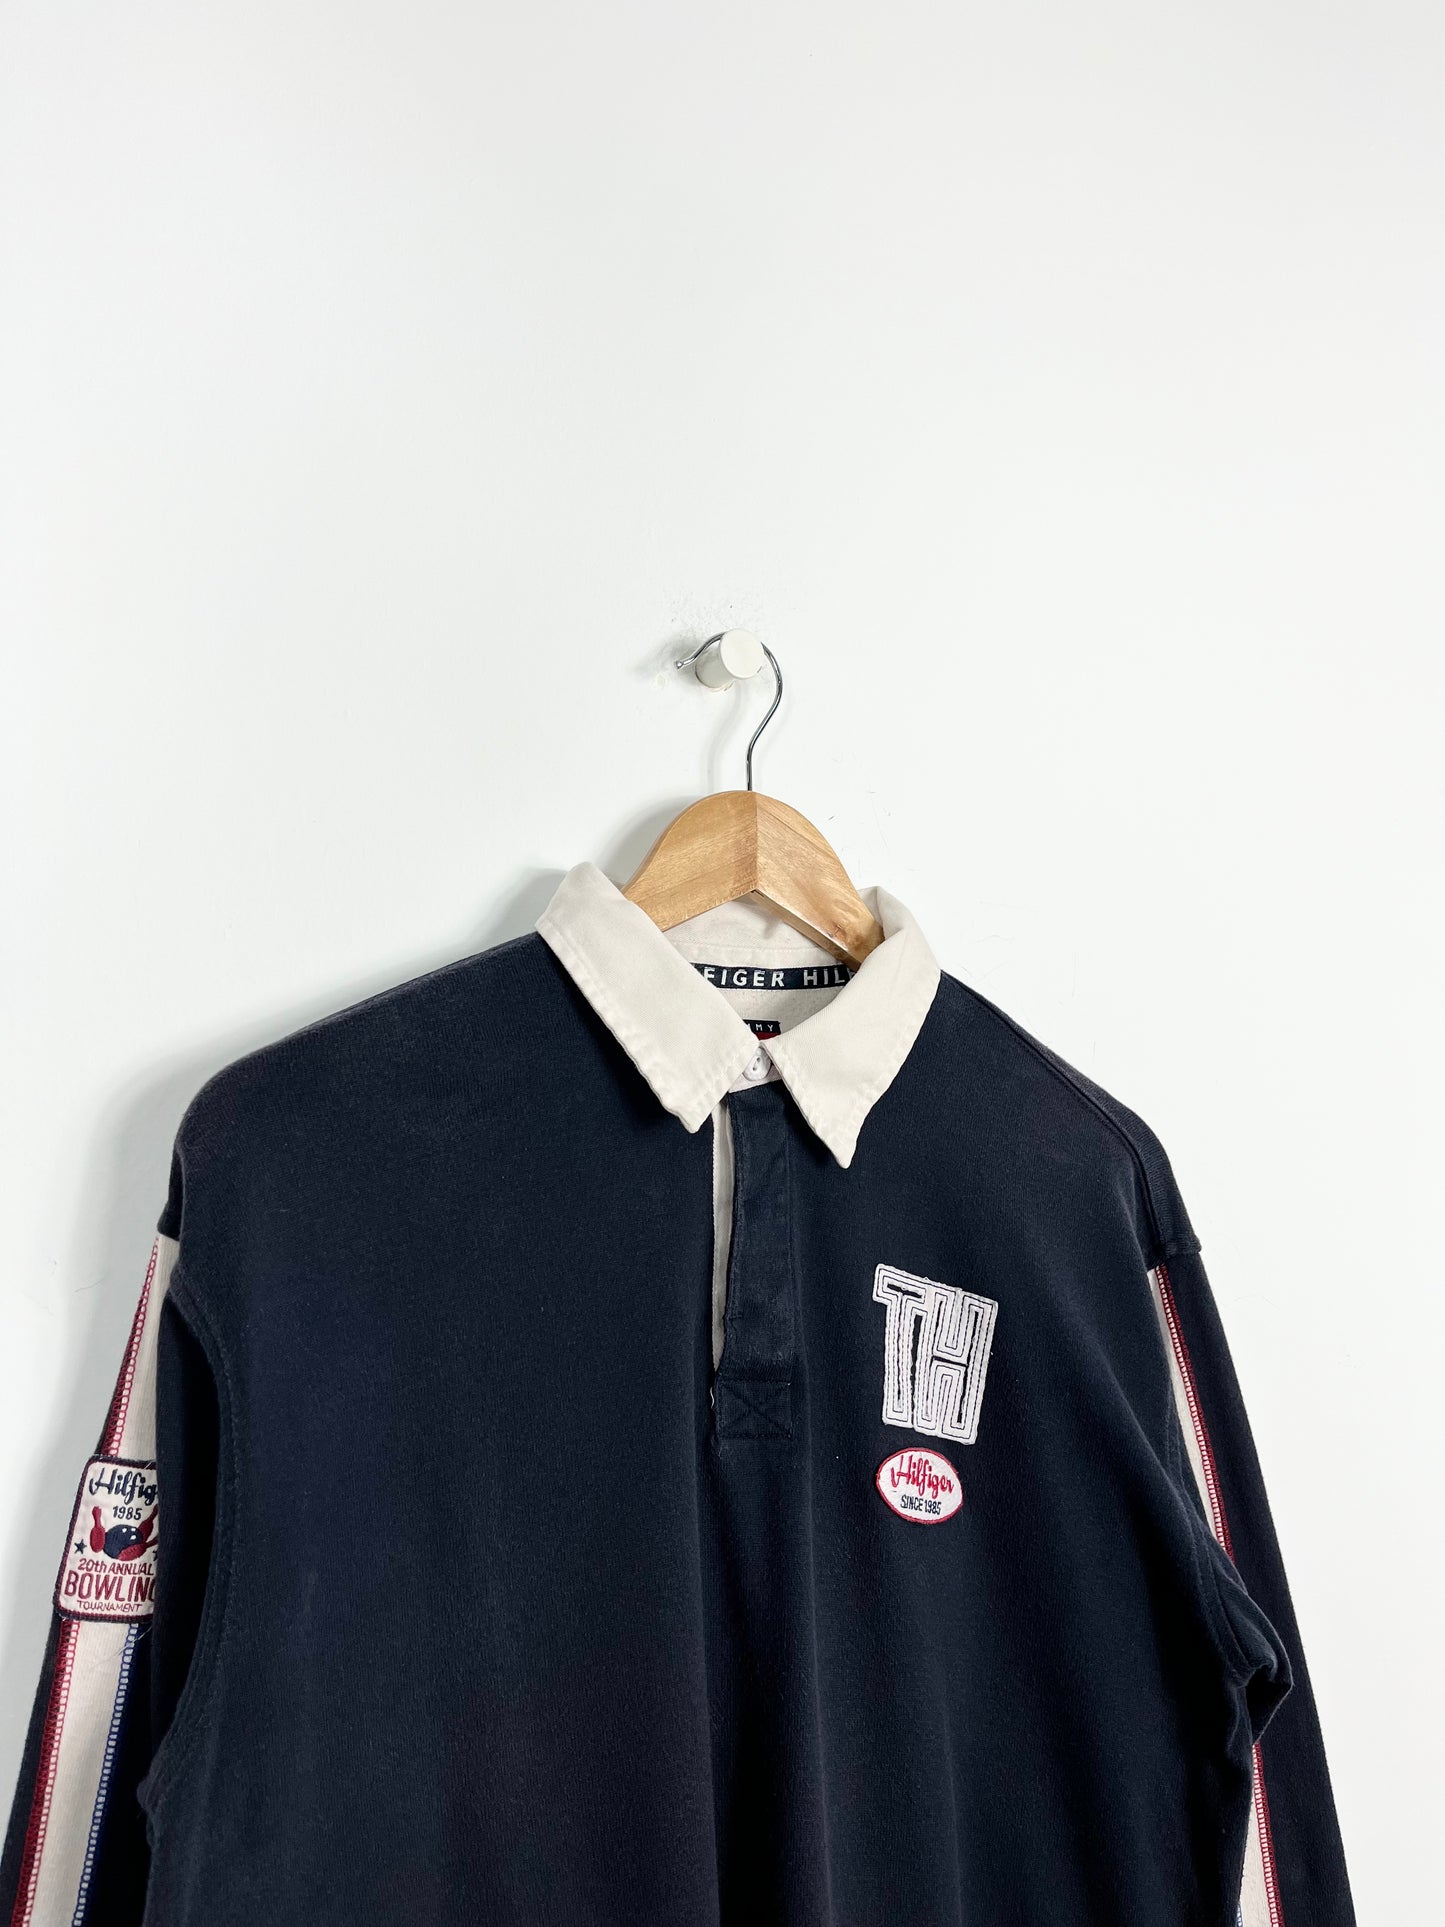 TOMMY HILFIGER VINTAGE LONG SLEEVED RUGBY POLO SHIRT (S OVERSIZE)